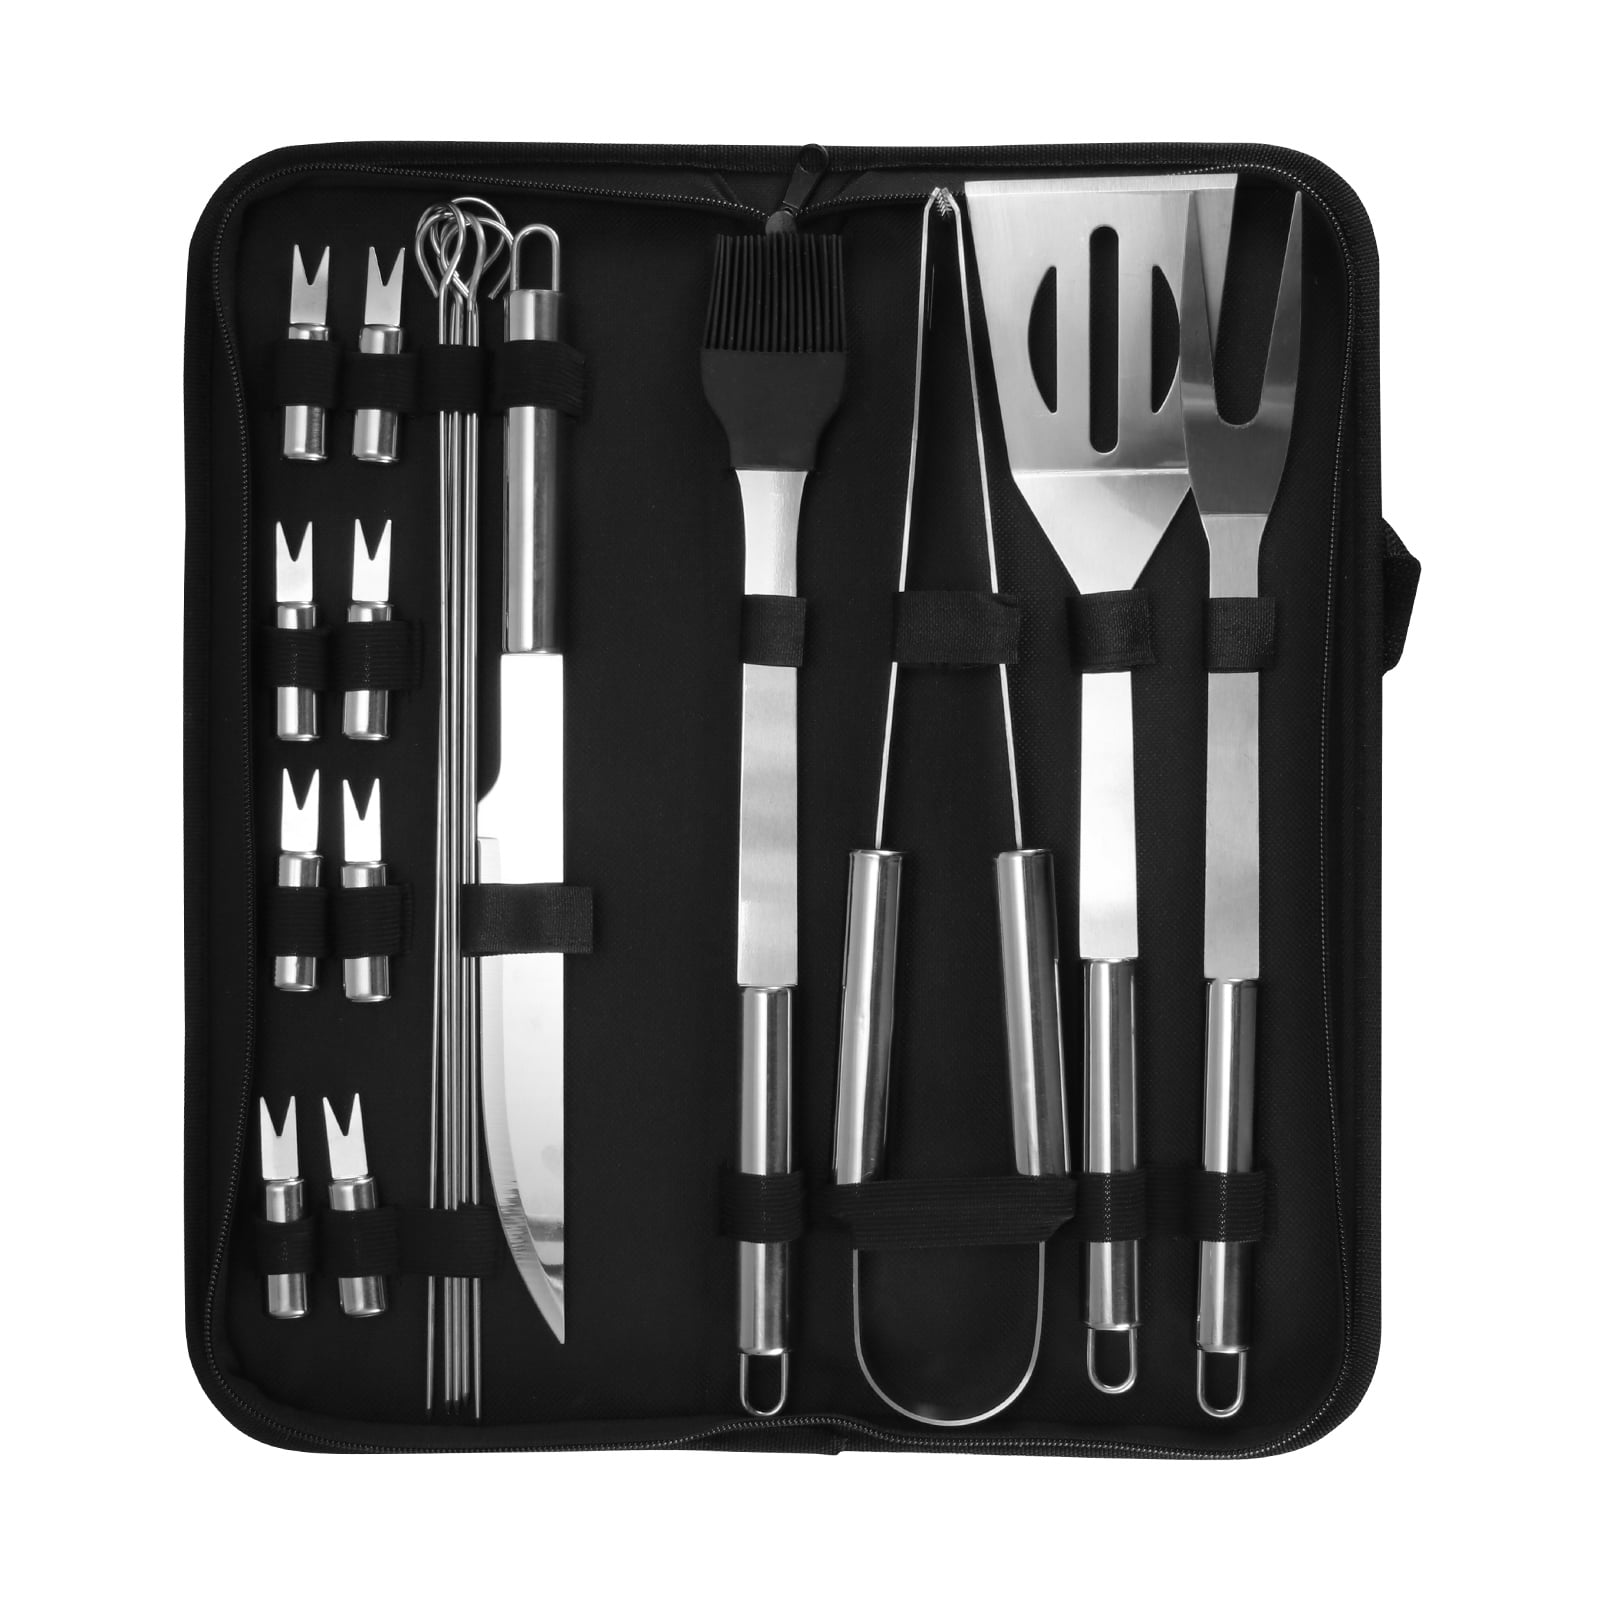 Stainless Steel BBQ Grill Tools Set Grilling Tool Camping Barbecue Utensils Kit 